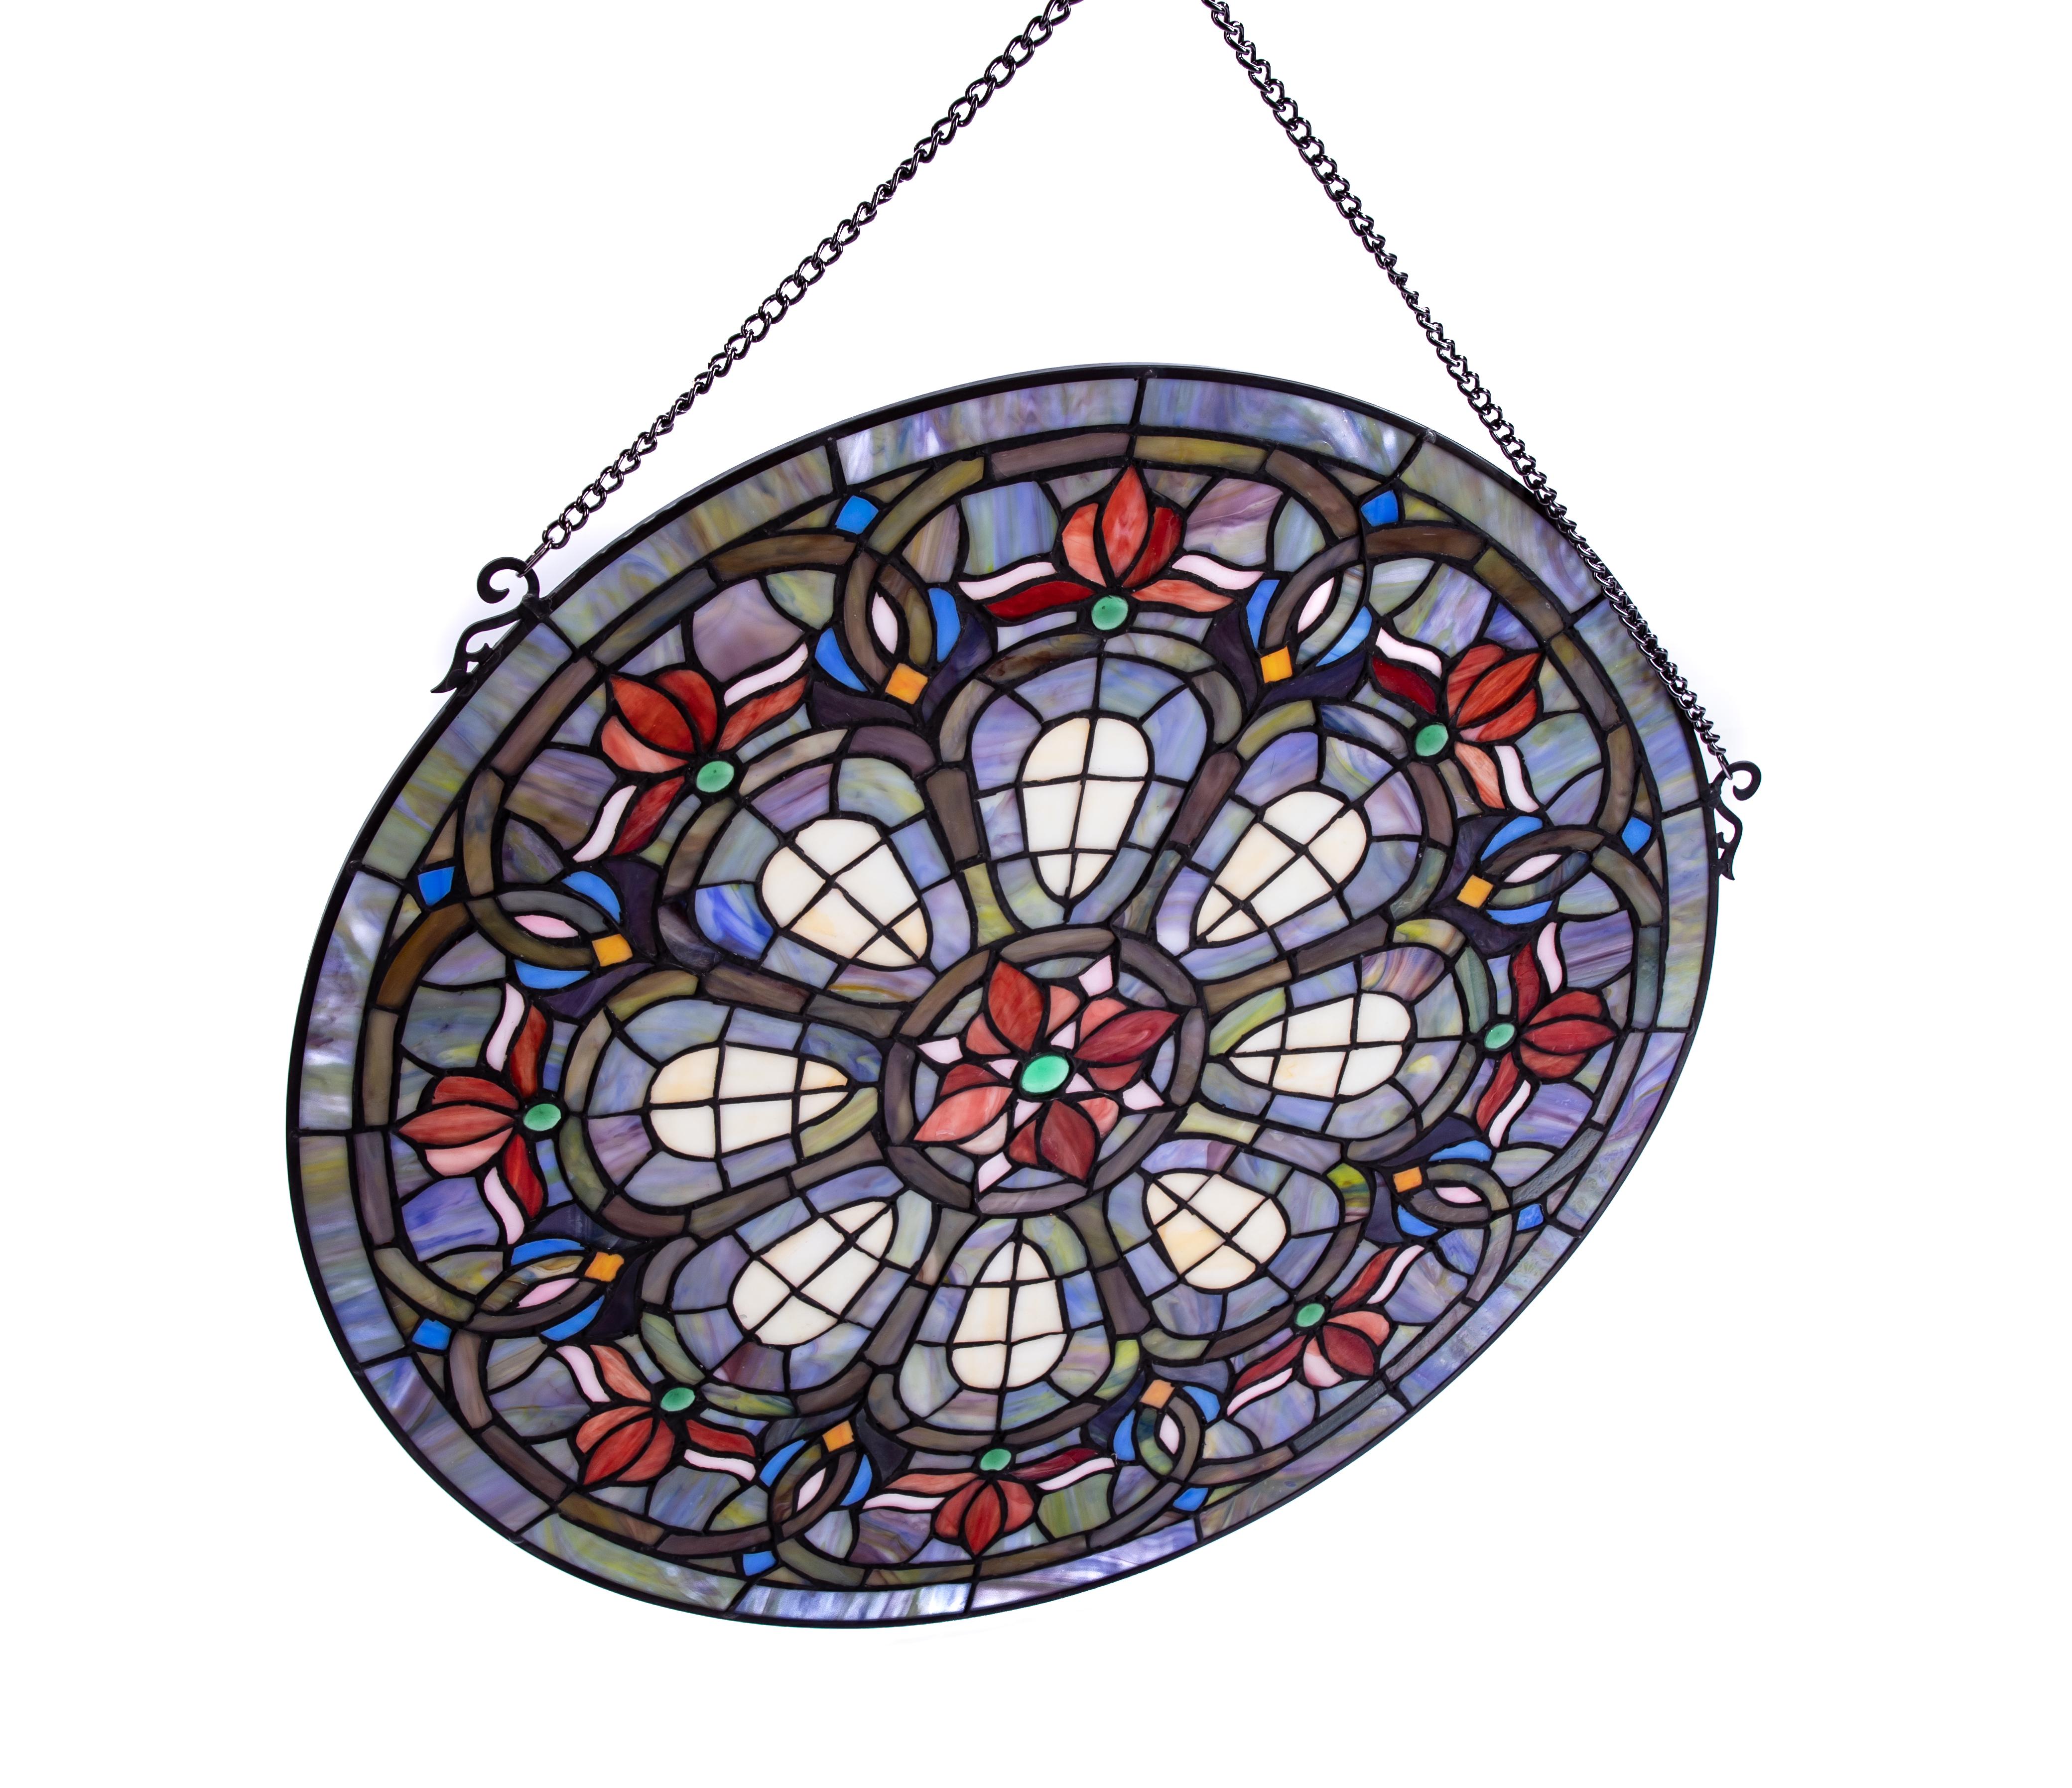 Hand-Crafted Stained Glass Panel